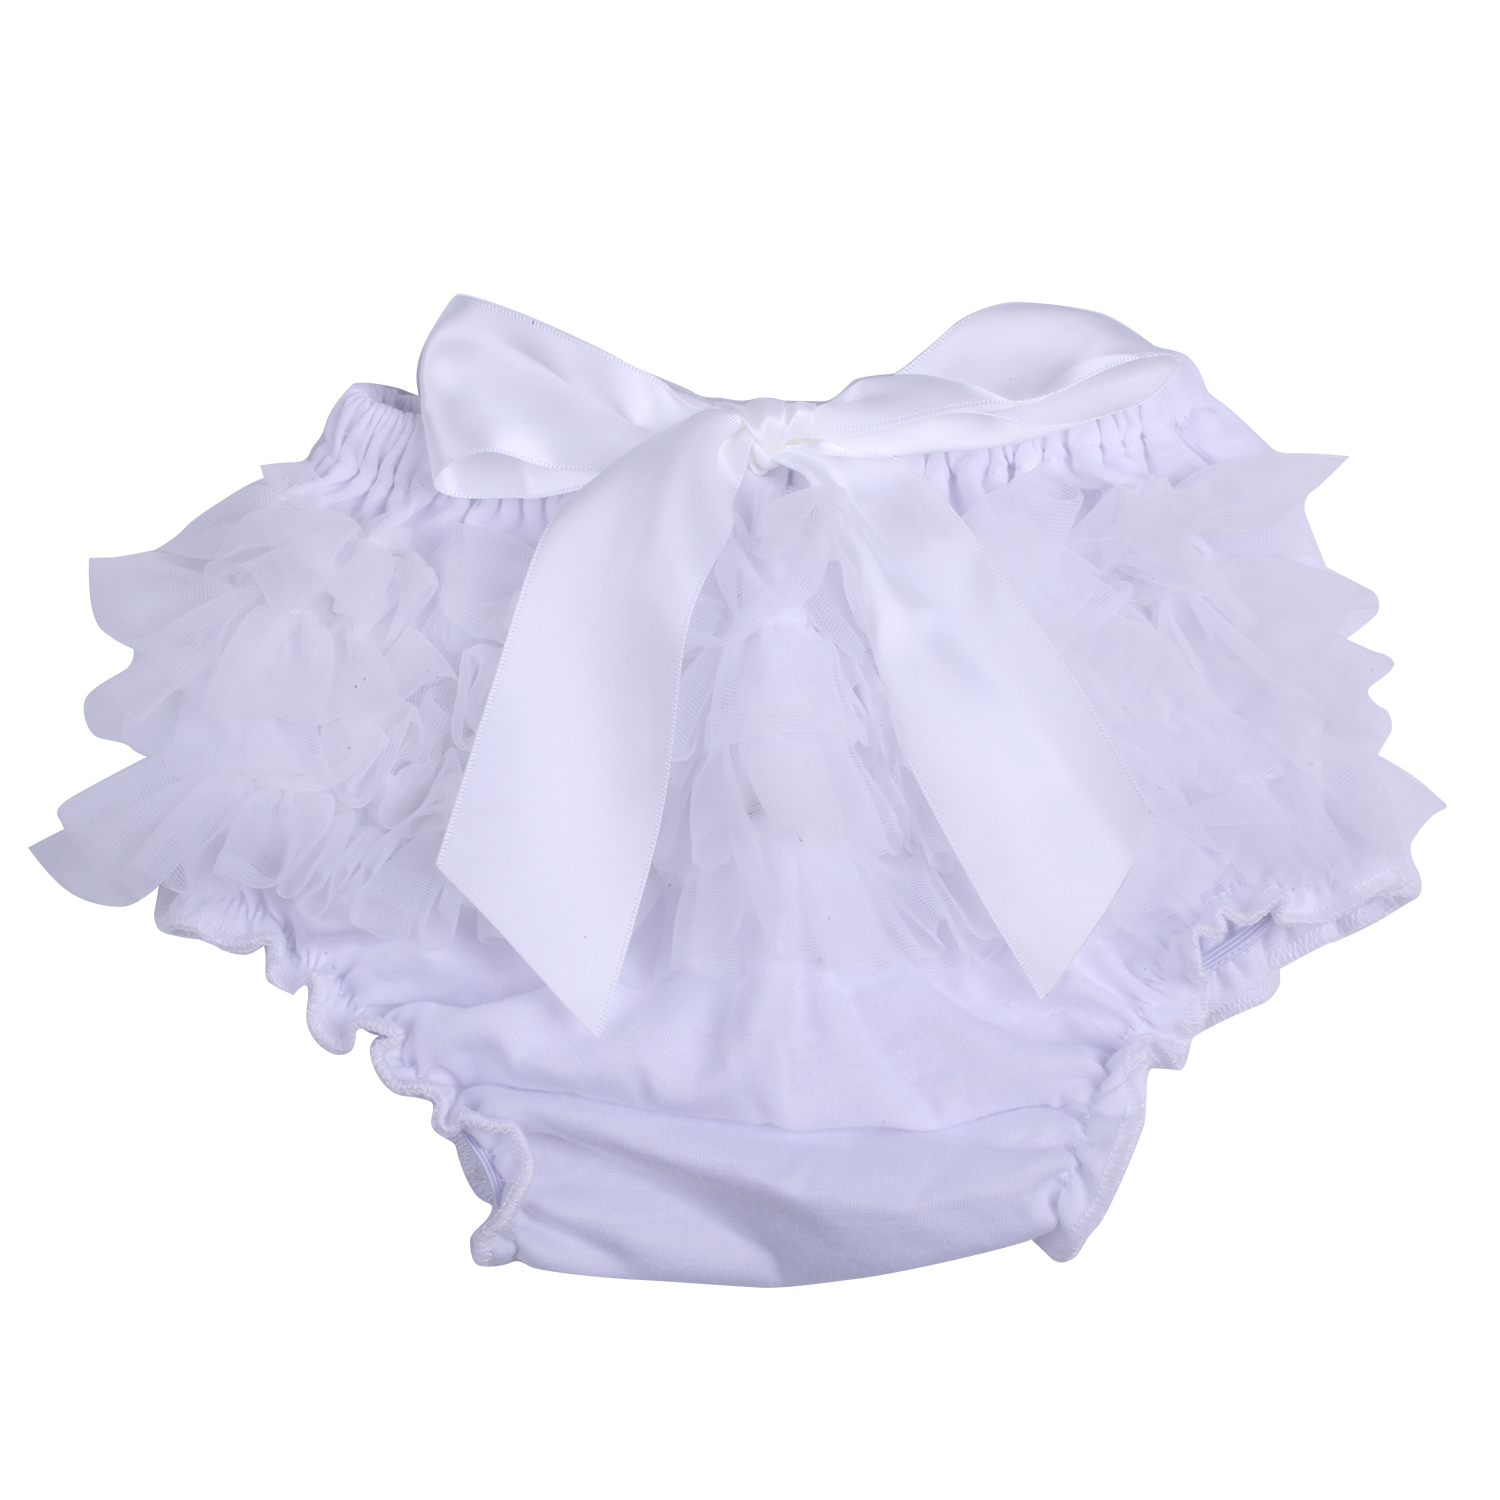 White Ruffle Bloomer Diaper Cover for Baby Girls Toddlers